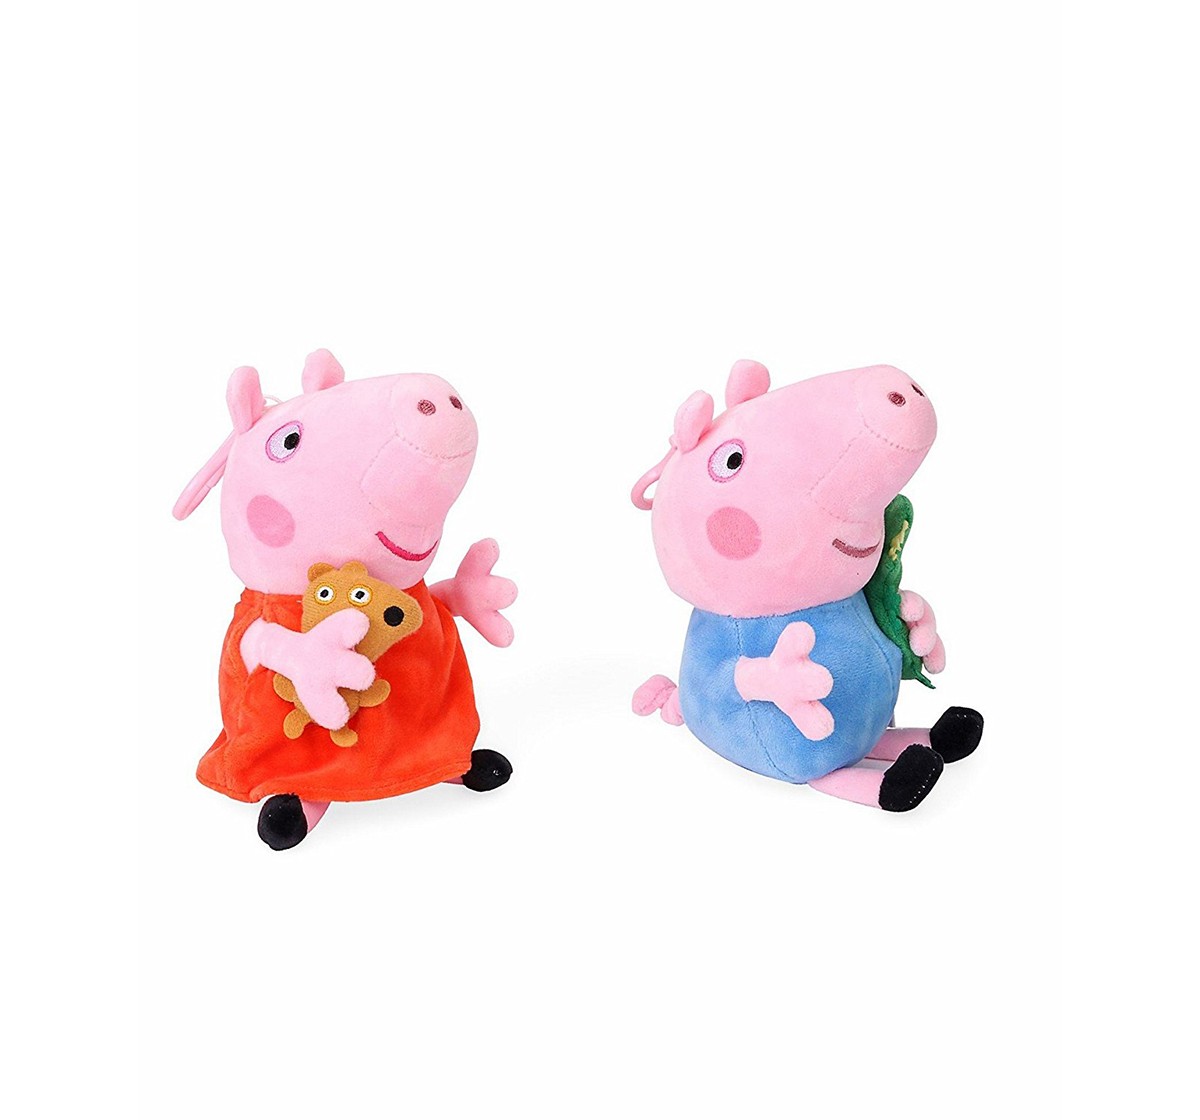 Peppa Pig Family Soft Toy Gift Box Combo Multi Color for Kids age 12M+ - 22 Cm 